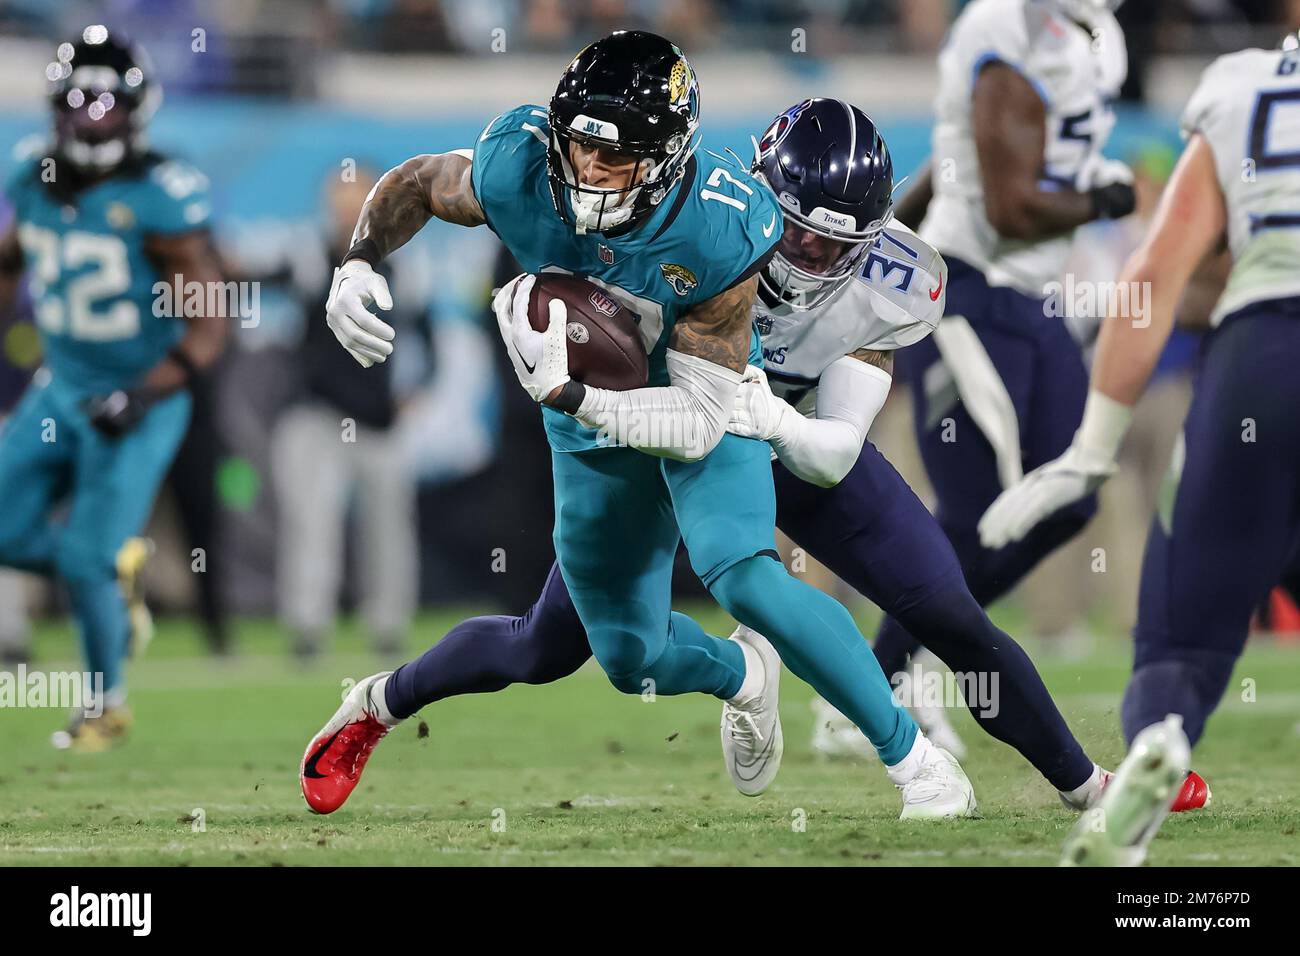 Jacksonville, Florida, USA. January 7, 2023: Jacksonville Jaguars tight end  EVAN ENGRAM (17) runs with the ball during the Jacksonville Jaguars vs  Tennessee Titans NFL game at TIAA Bank Field Stadium in